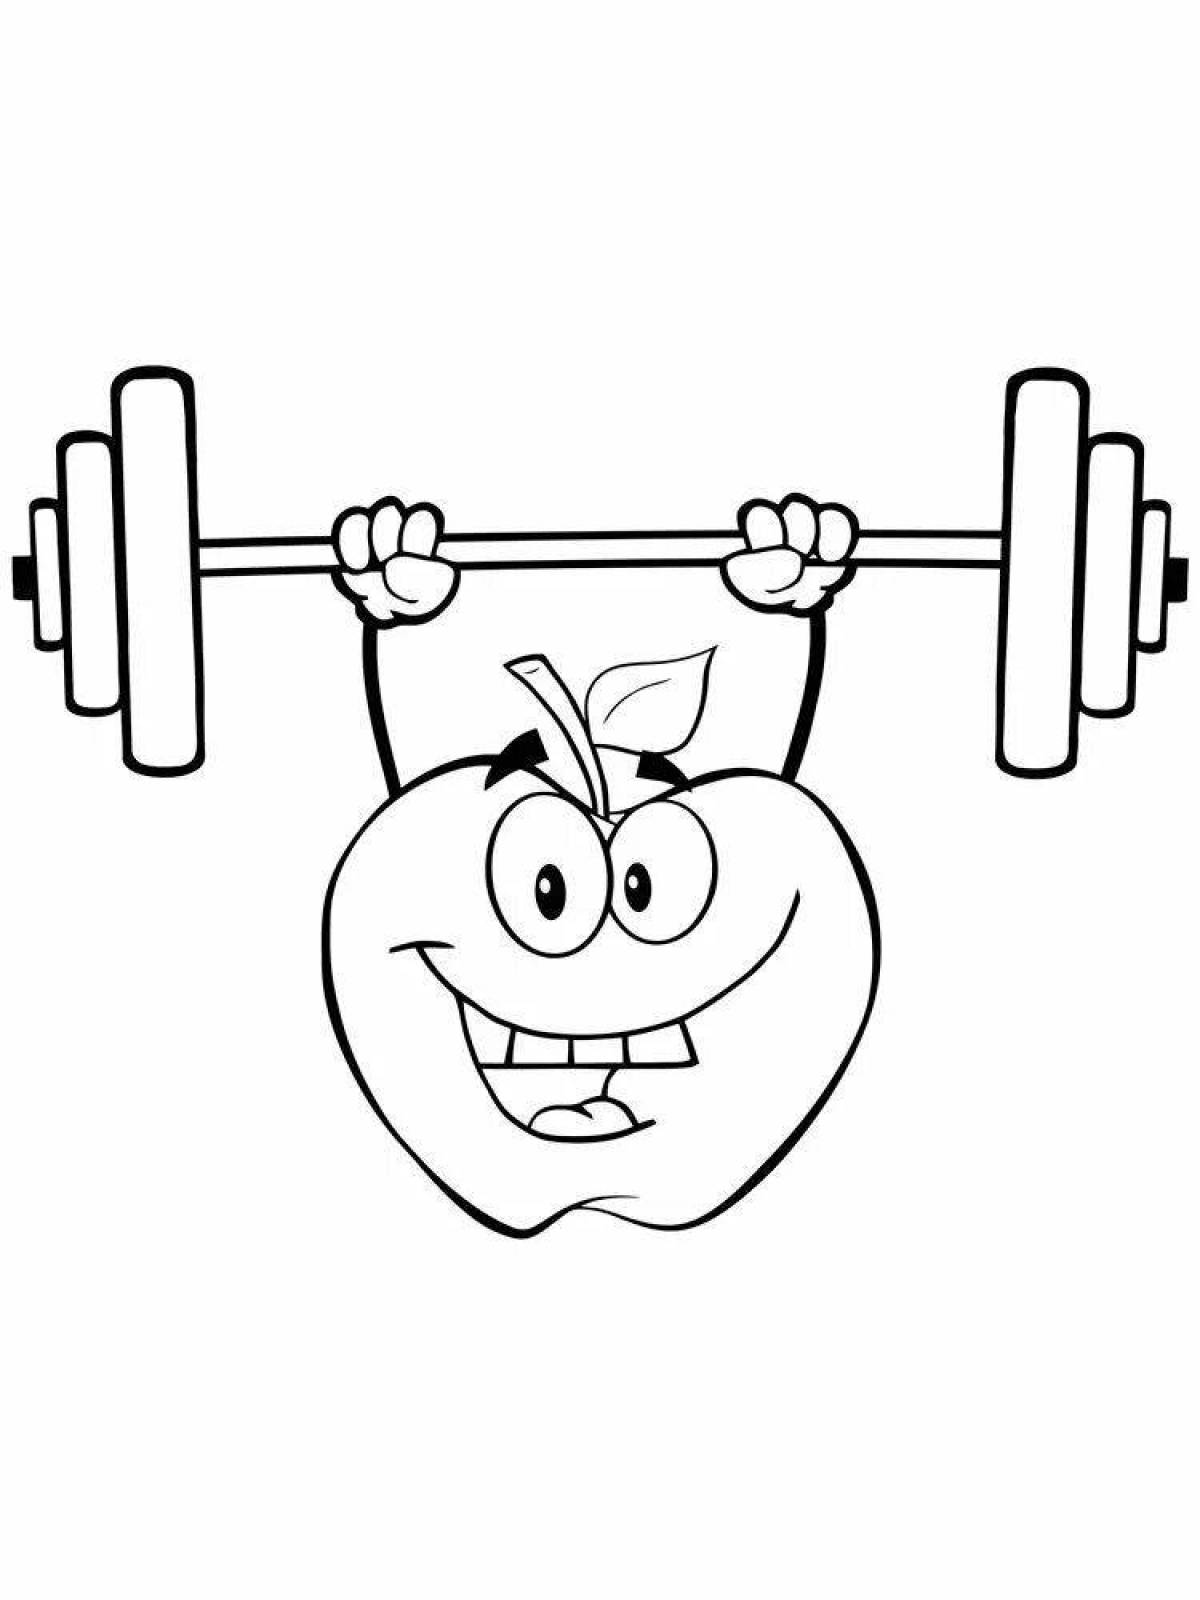 Coloring book for children about exercises